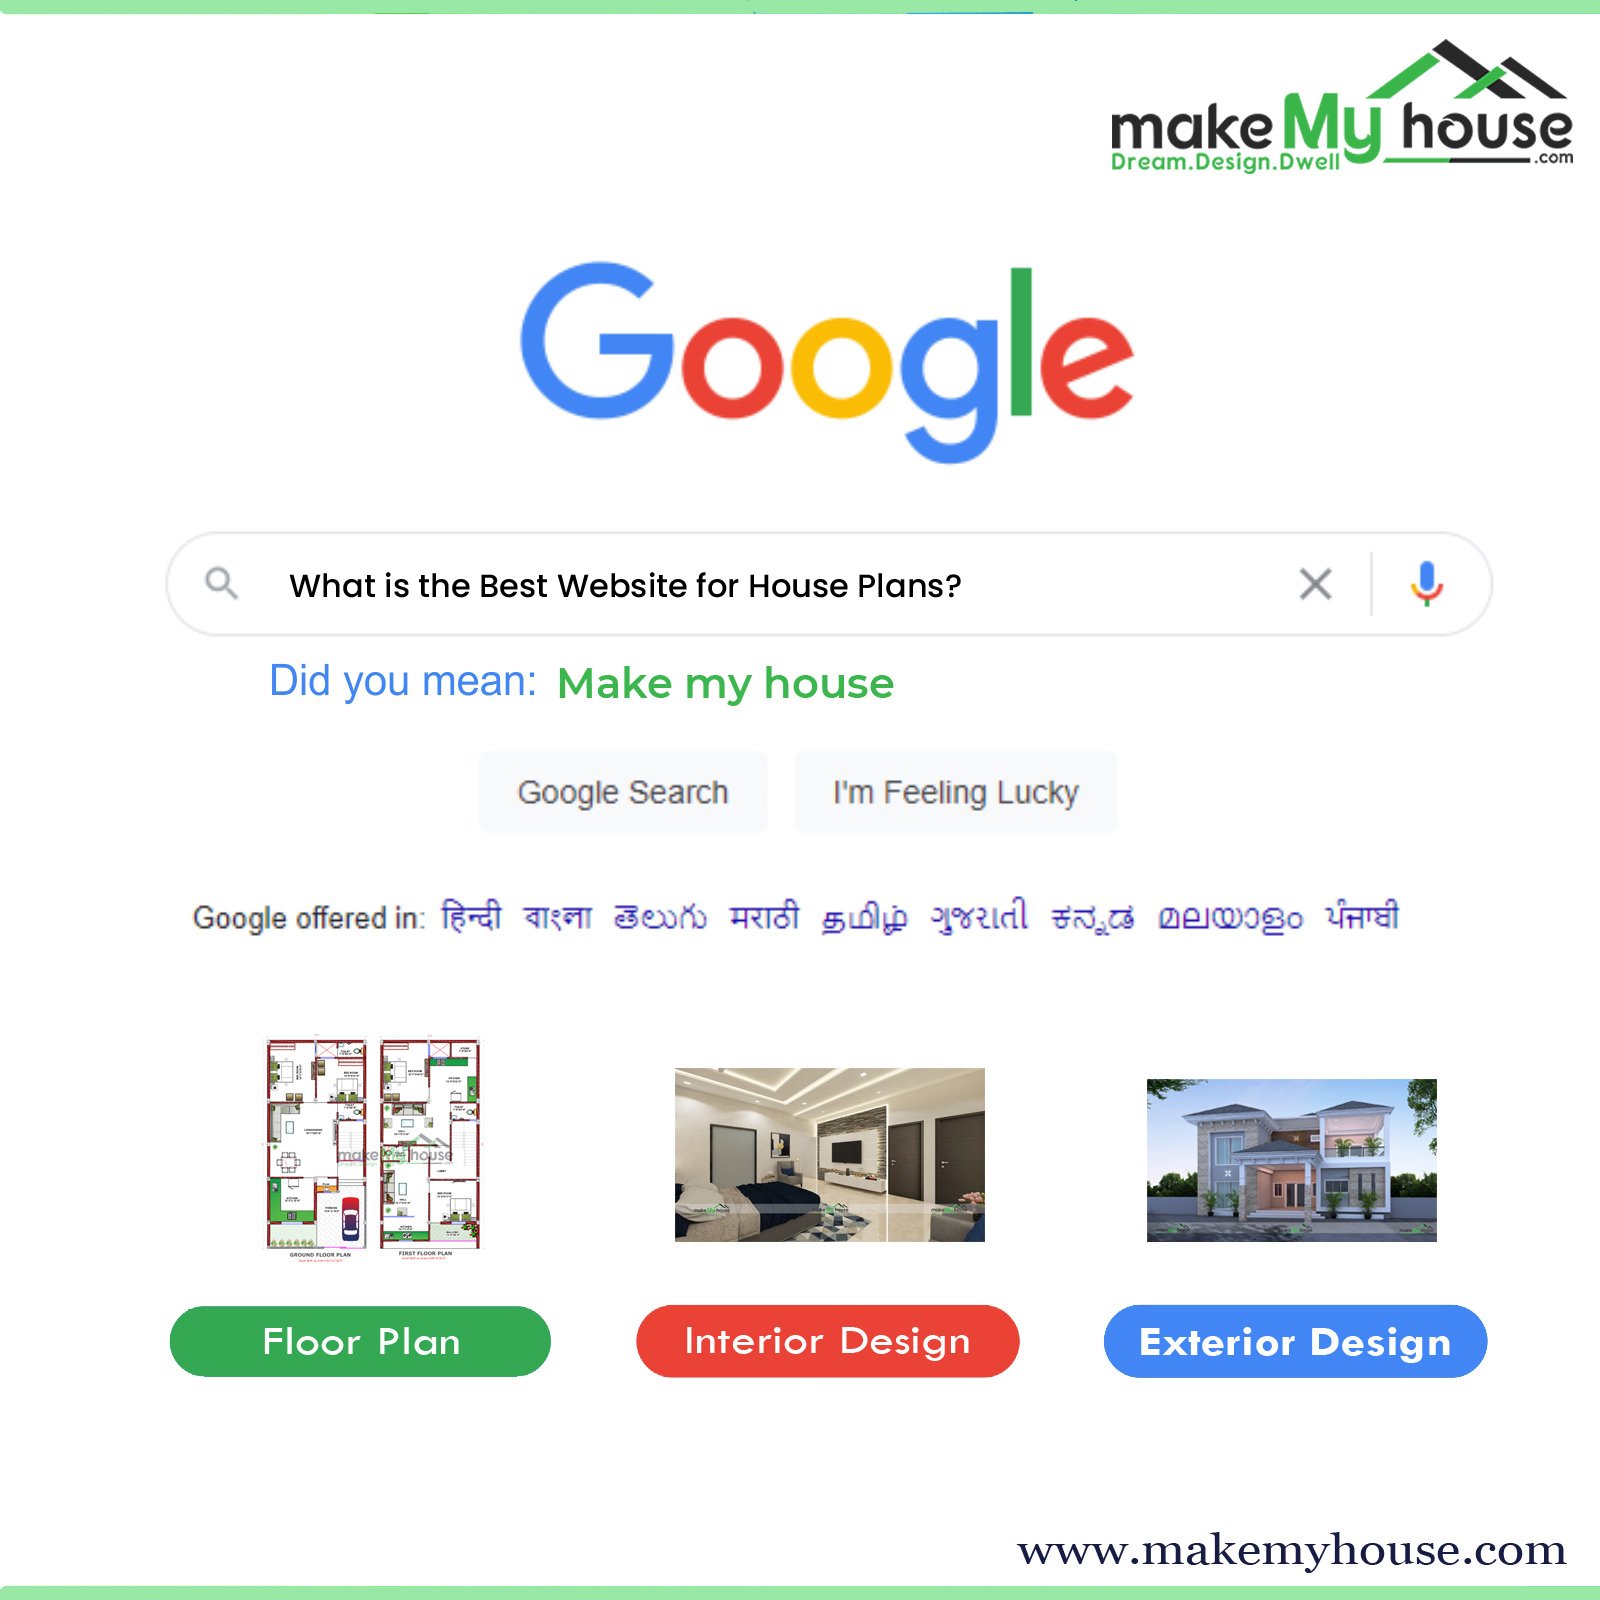 What is the Best Website for House Plans?